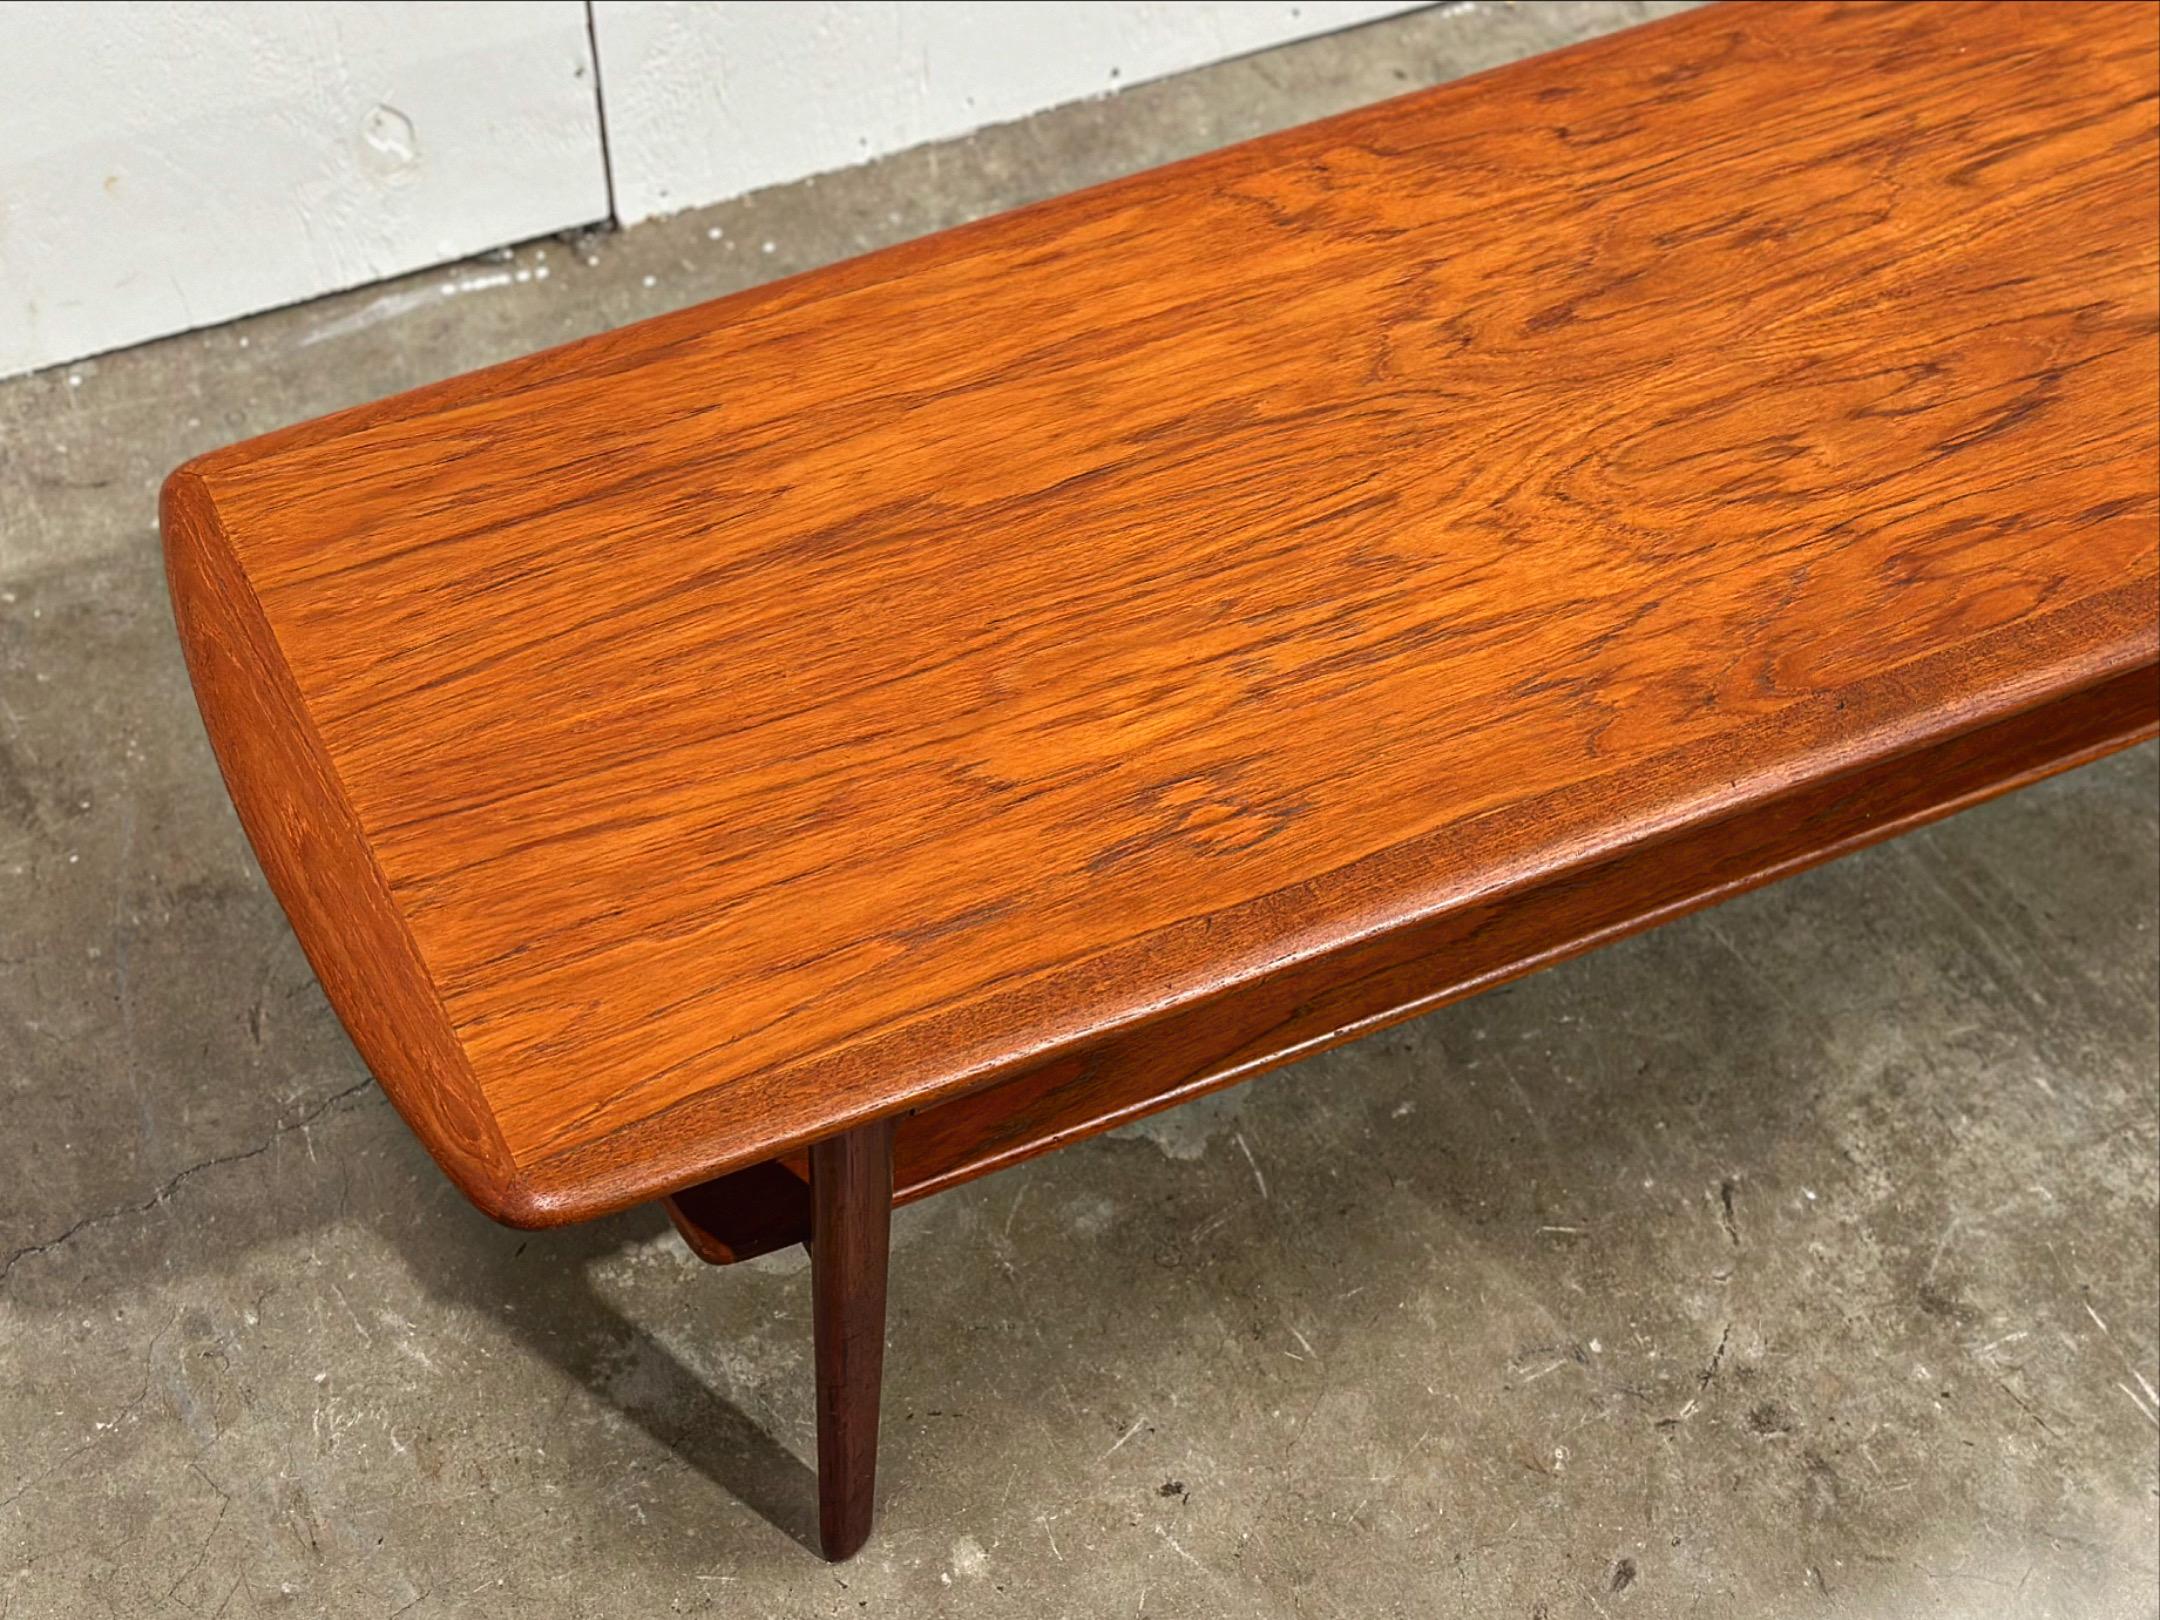 Mid century Danish modern teak cocktail or coffee table designed by Svend Age Madsen for Karl Lindegaard. Long rectangular top with rounded edges and a convenient lower shelf. Solid sculpted old growth teak legs.
Fully restored by our team - this